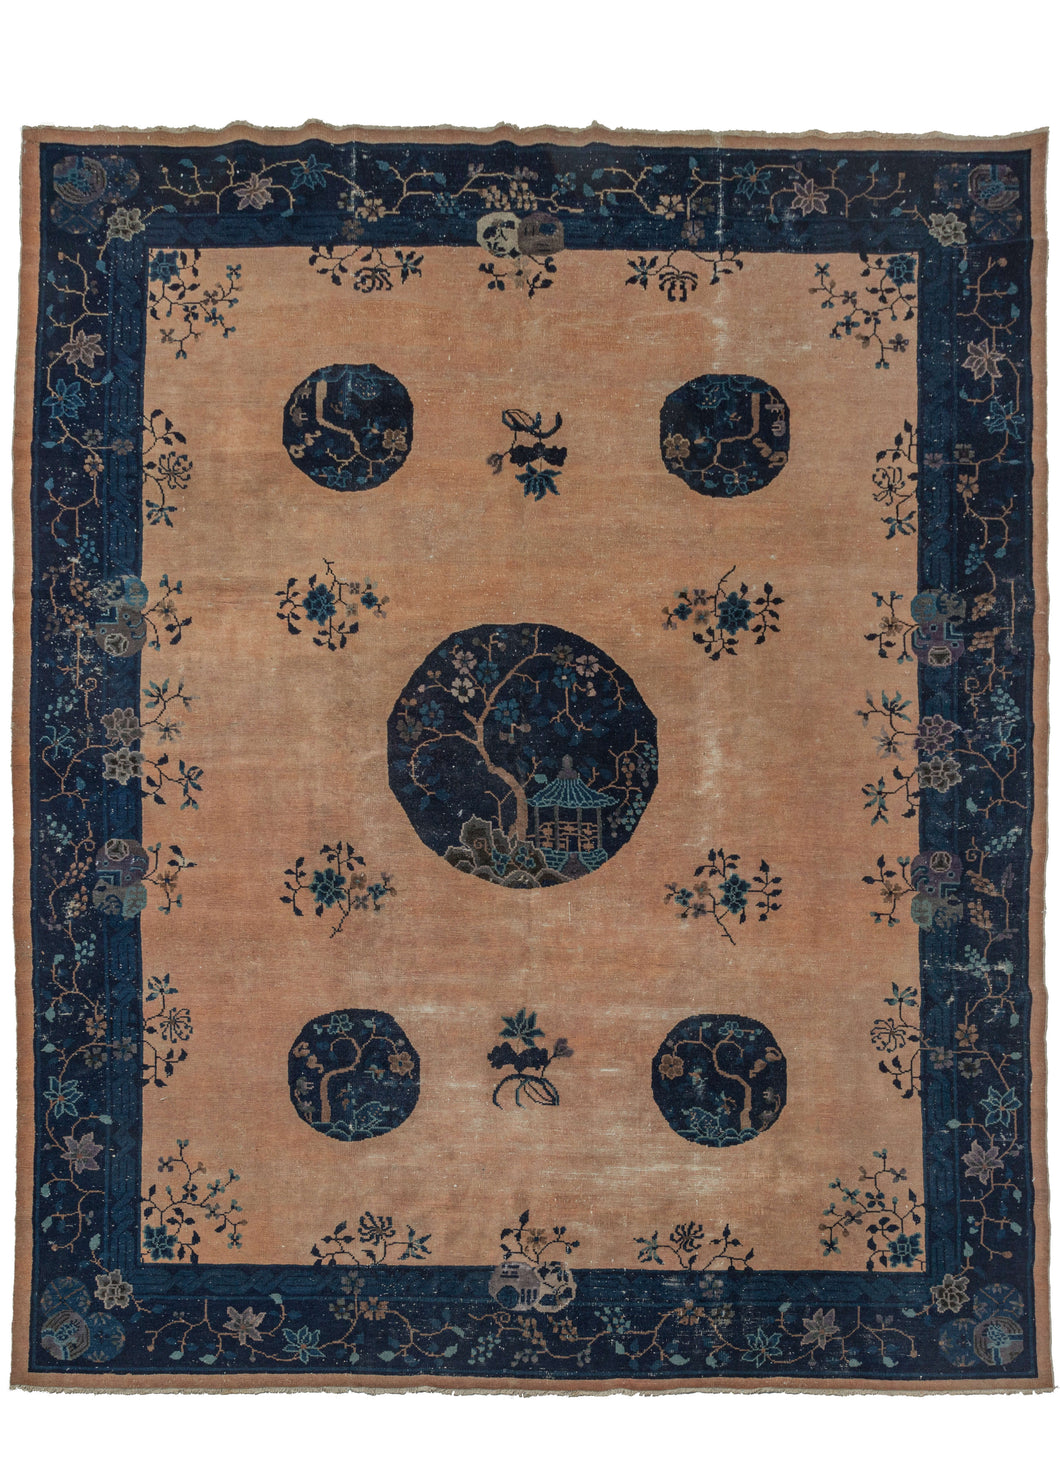 Antique Chinese FaTi area rug composed of an ivory field with a peachy tint, and medallions in all shades of blues. The central medallion features a gazebo and tree design, with the smaller medallions featuring a similar design. The border is composed of a floral meander on a dark blue ground. The blossoms in the design are a mix of peach blossoms, chrysanthemums, and peonies, common flowers used in Chinese imagery. The color palette is limited to myriad shades of indigo blue, and soft peachy ivories.